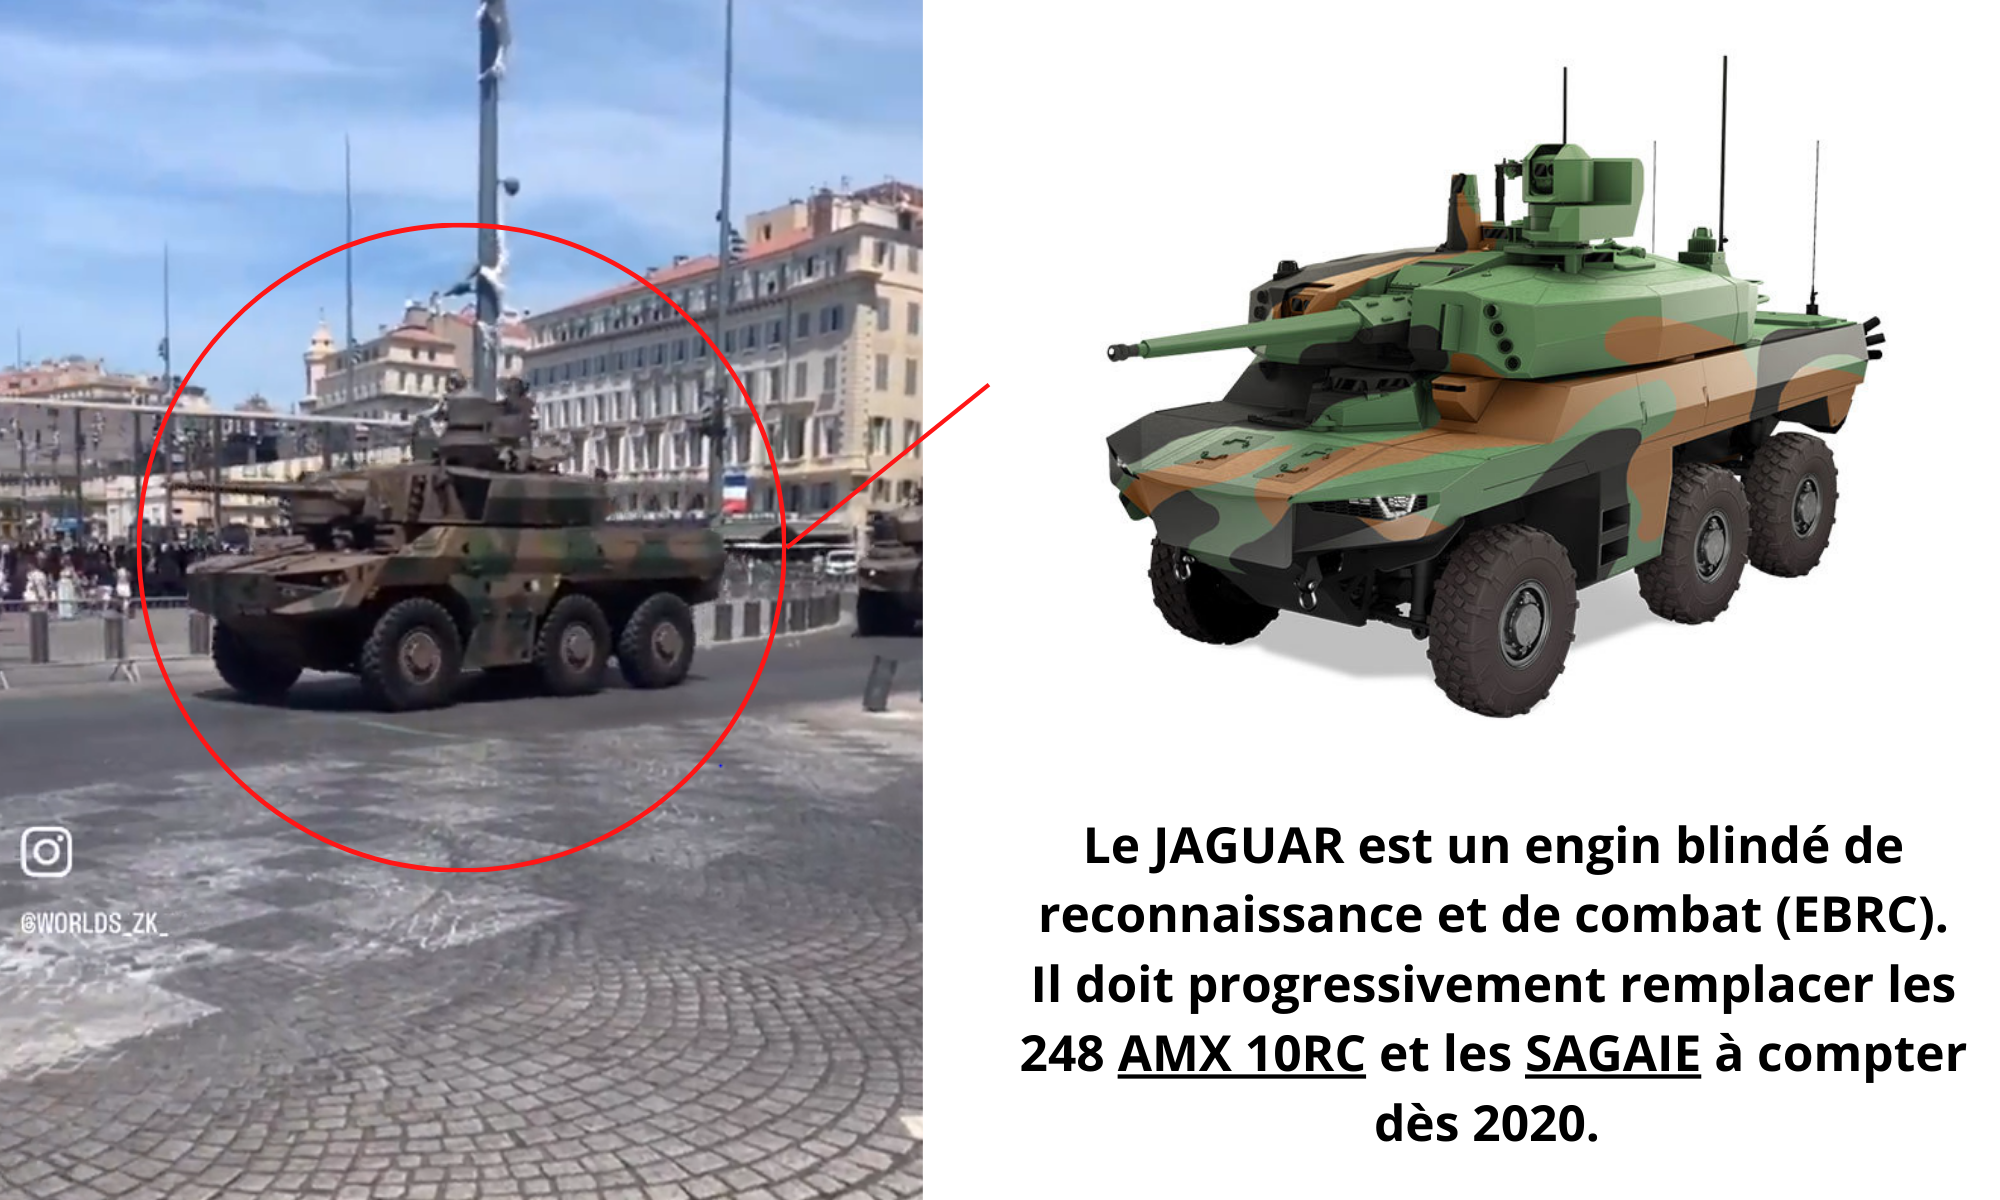 Two Jaguar-type armoured vehicles are visible.